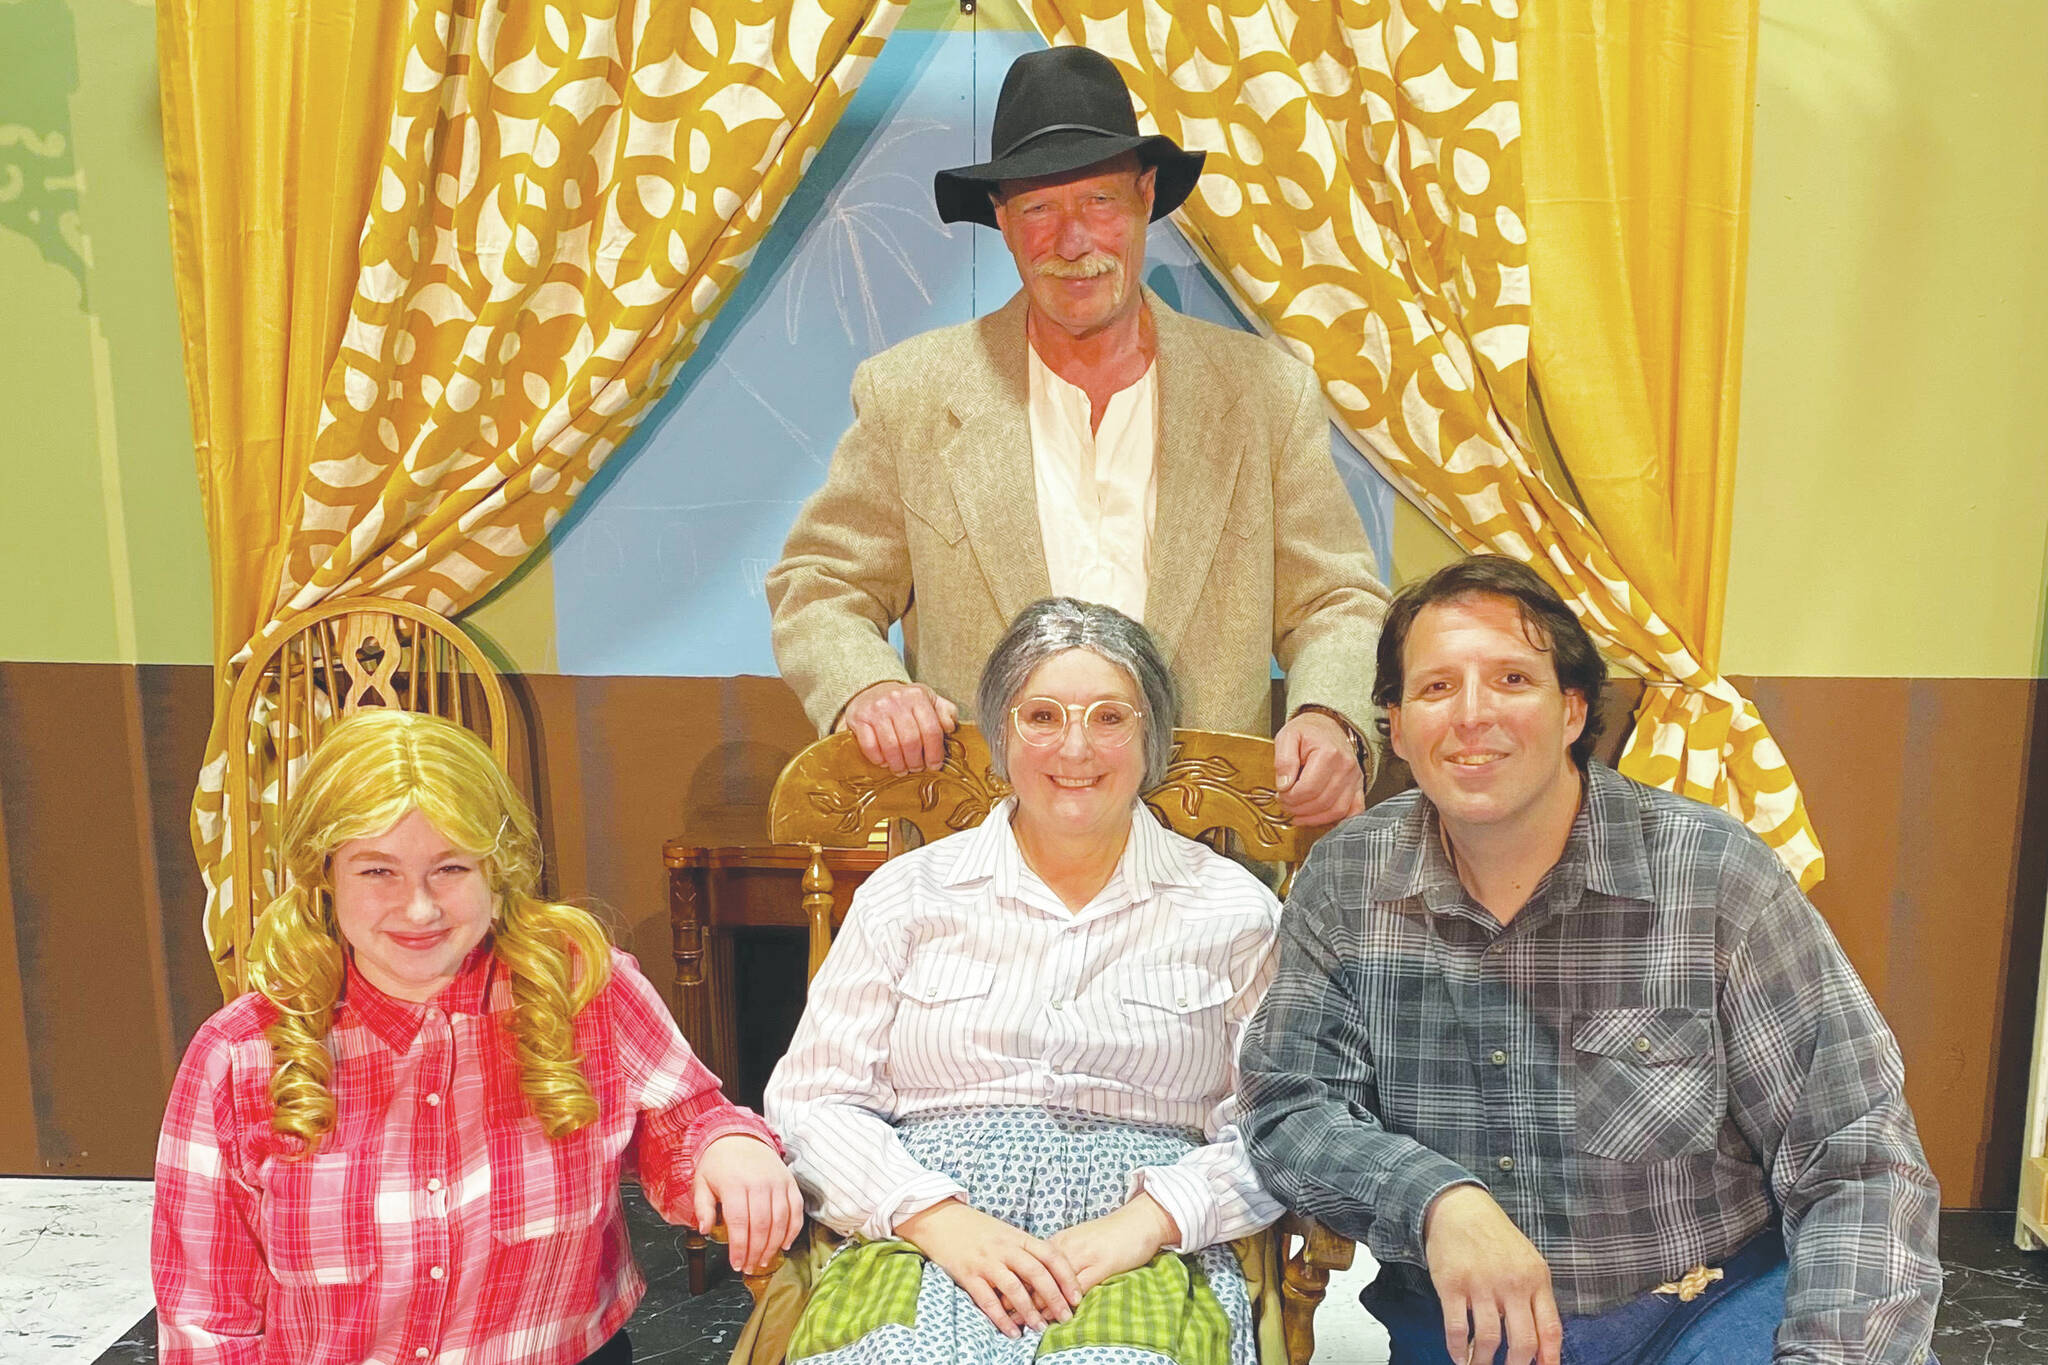 Members of the cast of Kenai Perfomers’ “The Beverly Hillbillies, the Musical” pose in September 2021. (Photo courtesy Terri Burdick)